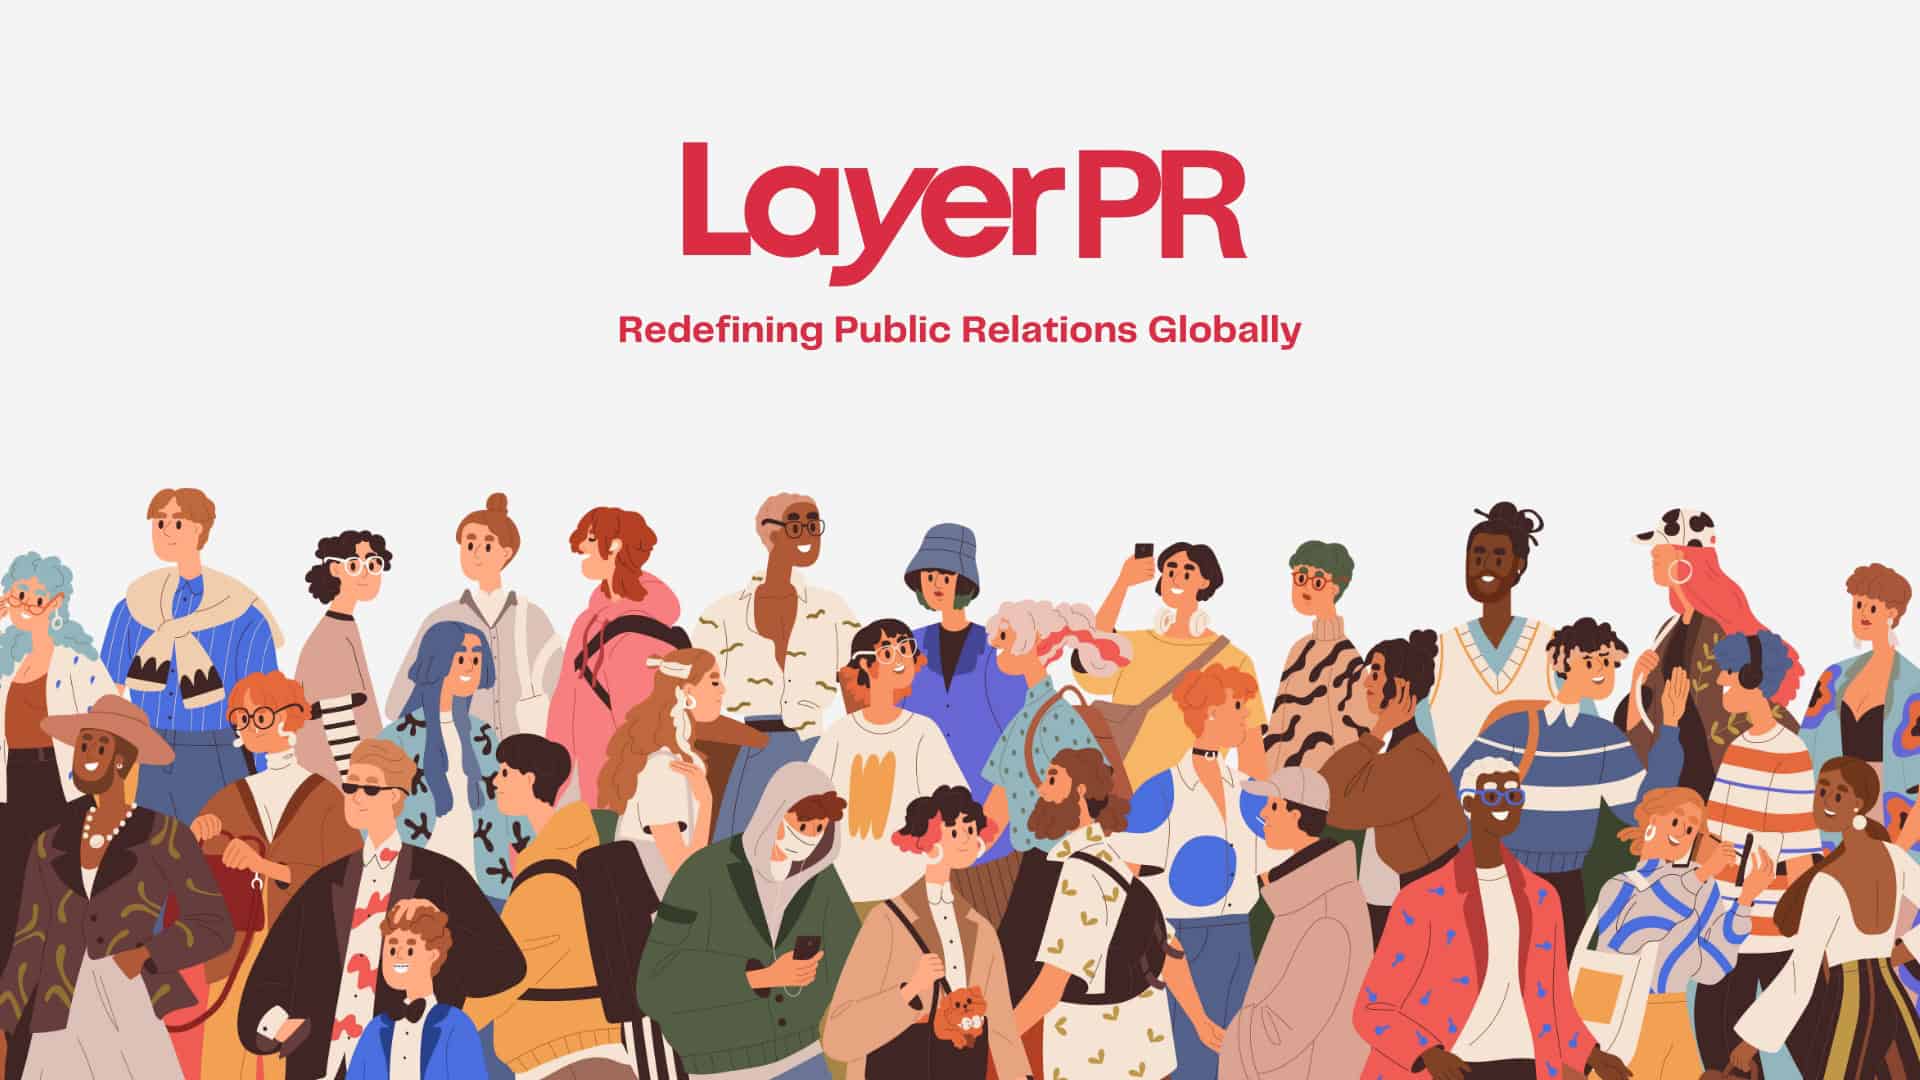 Join the Layer PR Startup Program and supercharge your startup or small business with unparalleled PR support, exclusive discounts upto 50%, and perso